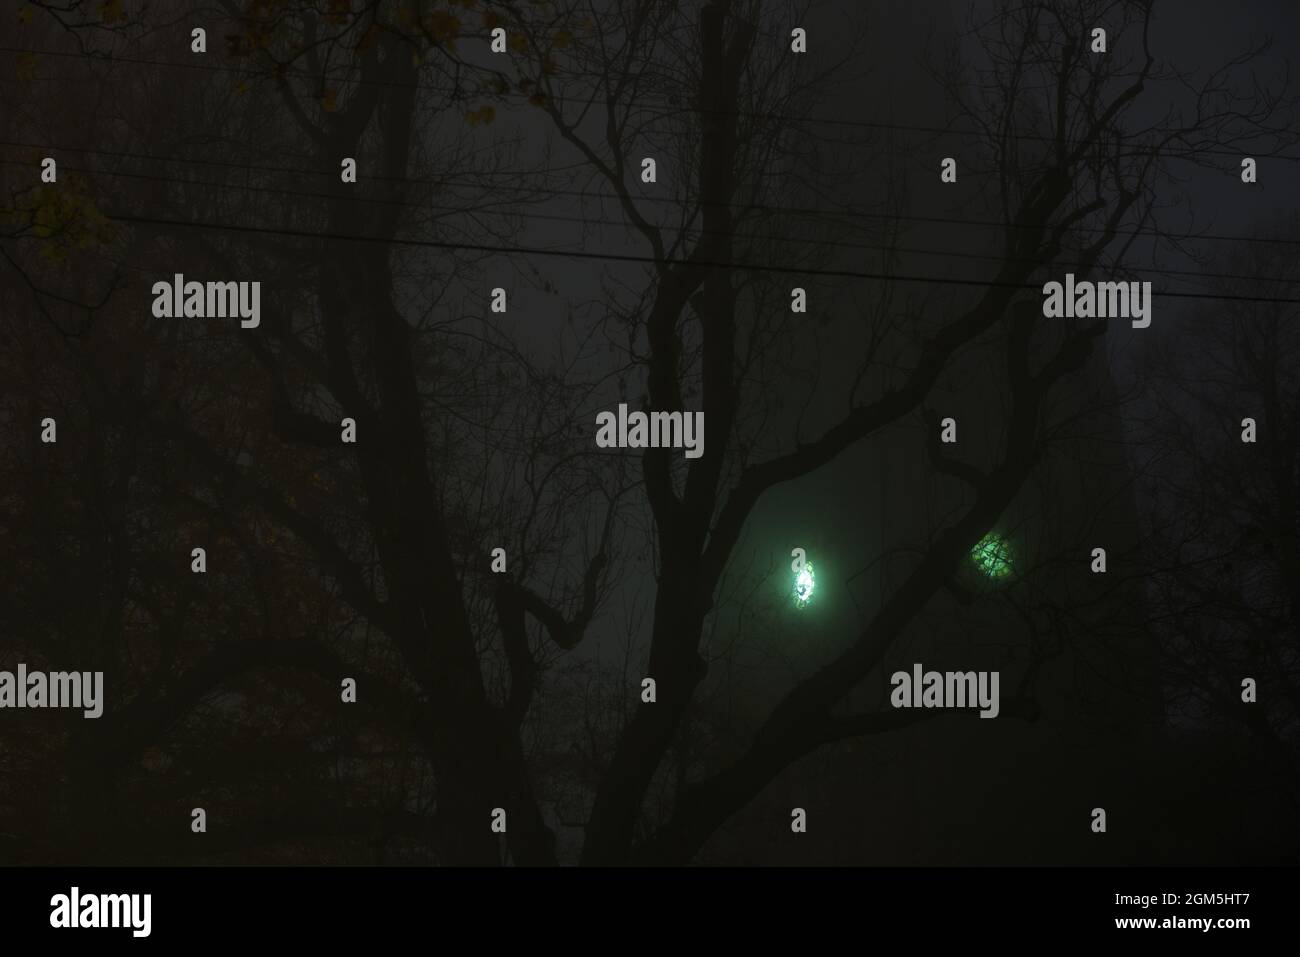 Eerie green clock face on a church tower shines through thick fog and dense tree branches with telegraph wires. Very spooky and dark night time image Stock Photo